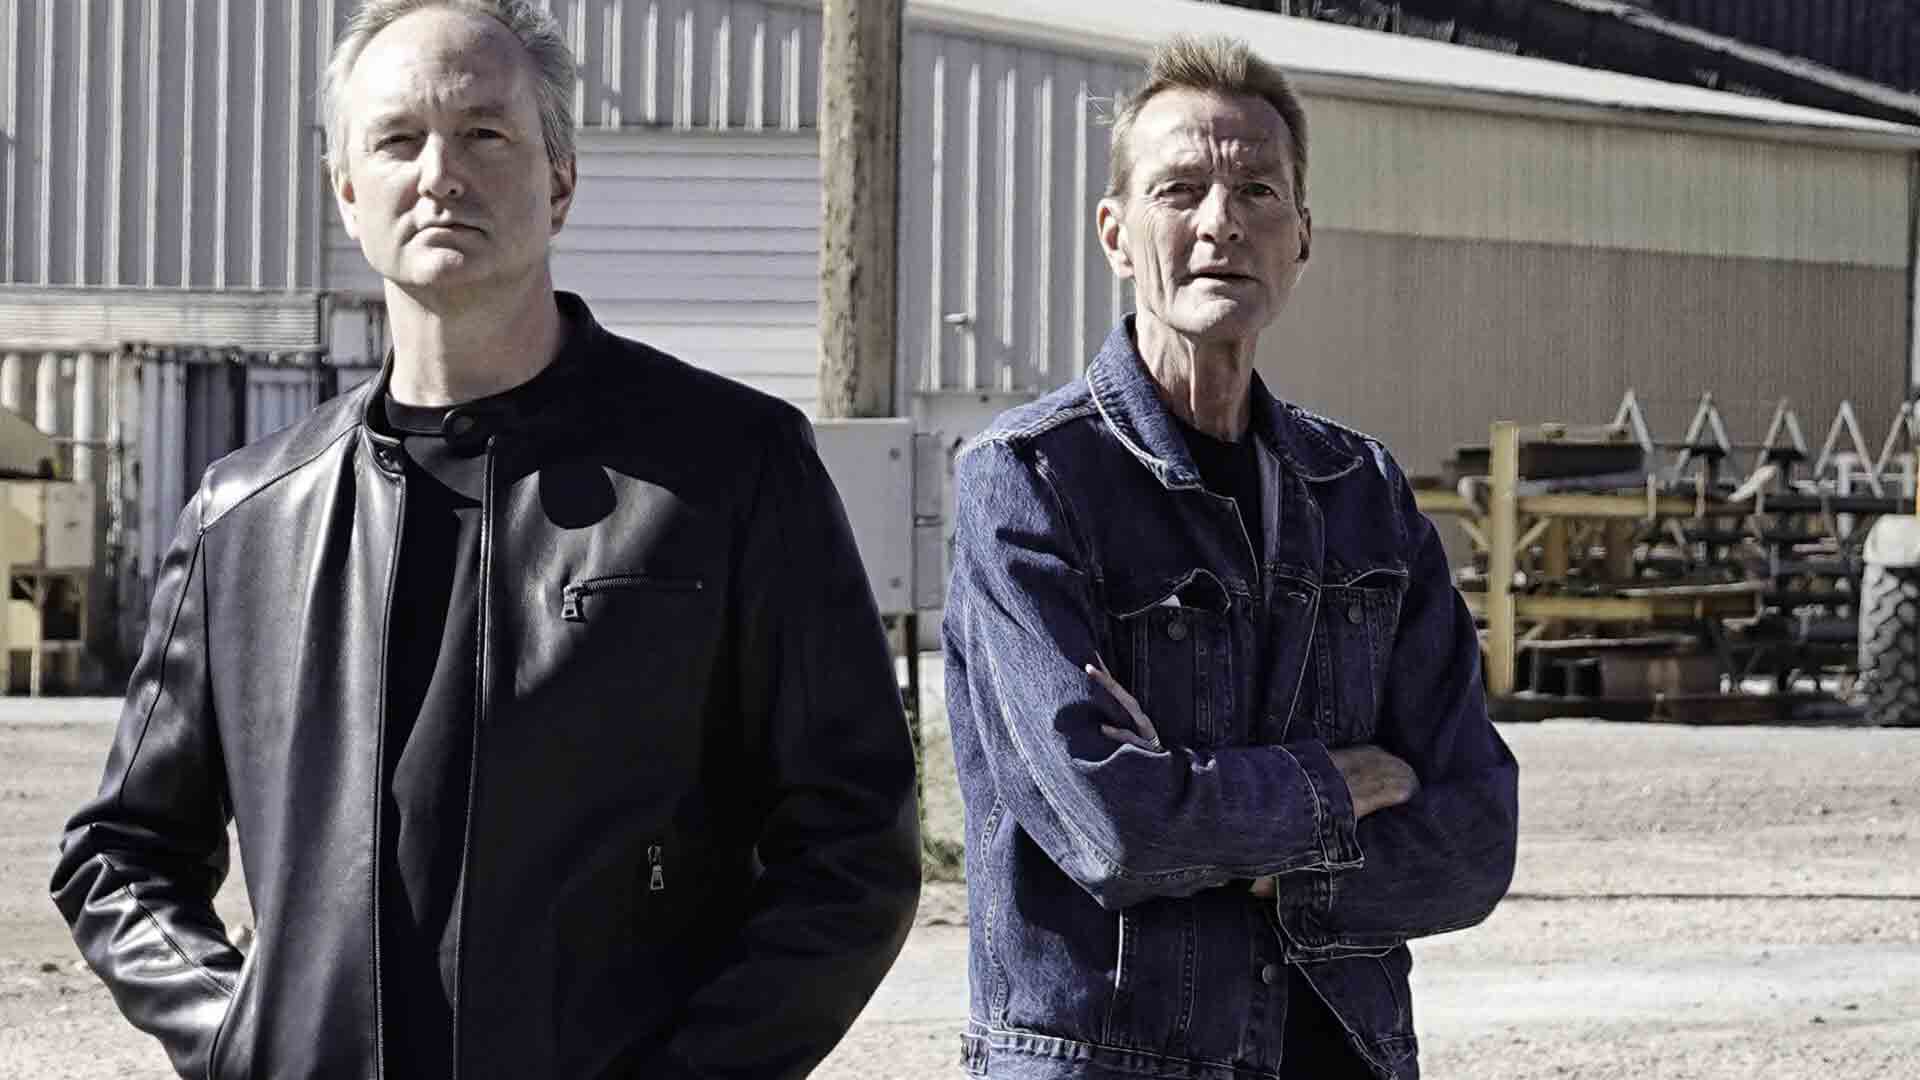 Andrew (left) and Lee Child